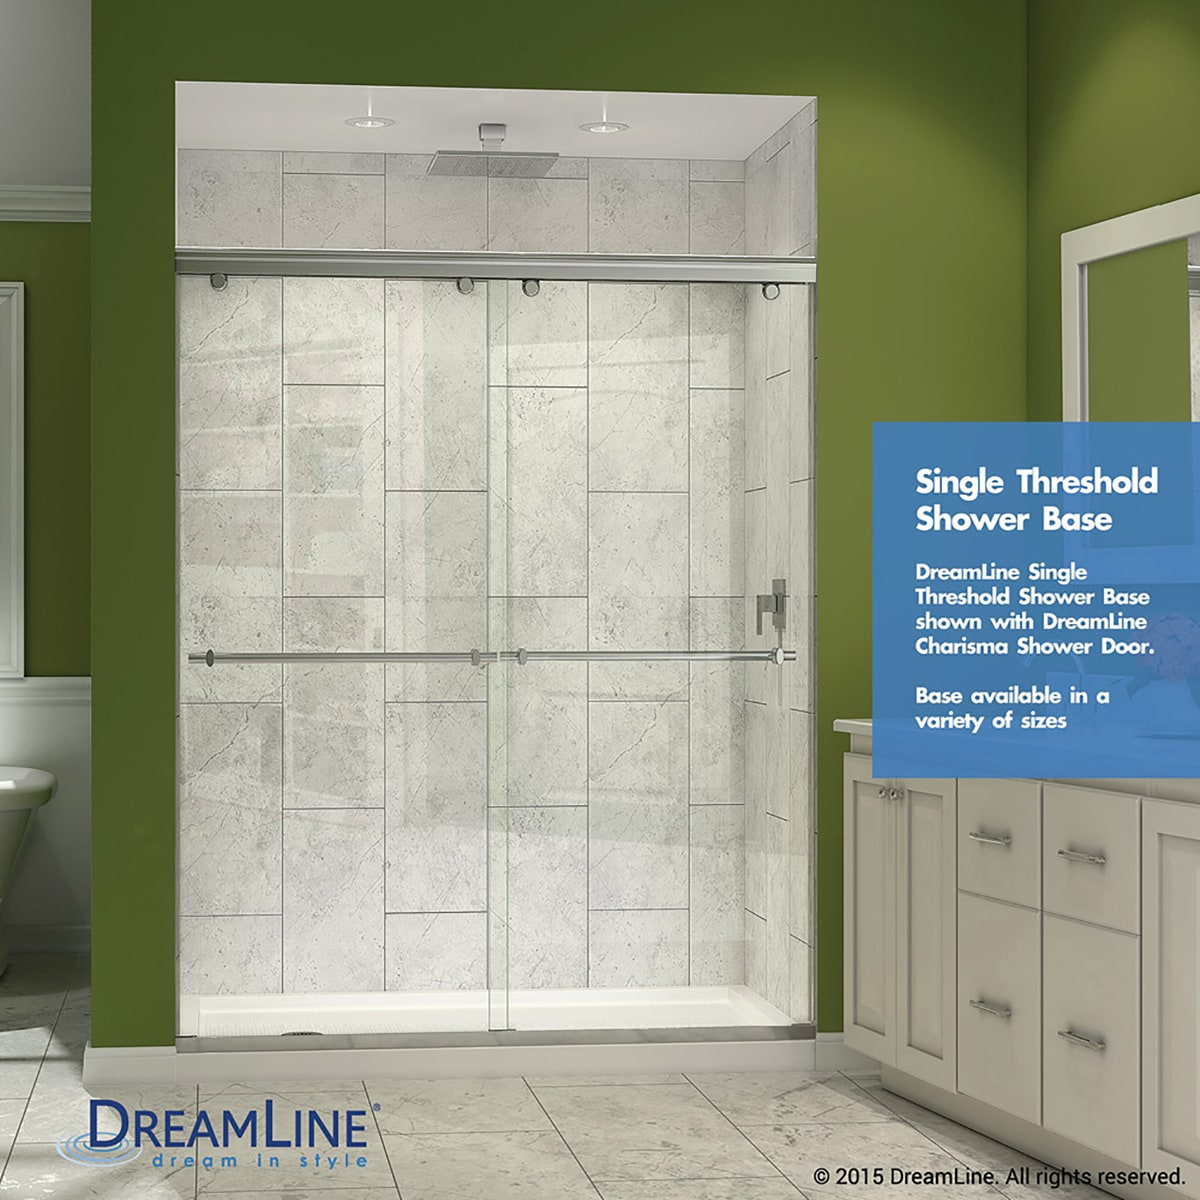 DreamLine SHTR-1130602-00  Right Hand Drain Shower Tray, White, Size  30 x 60 x 5, High quality acrylic top is scratch and stain resistant,  Slip-resistant textured floor for safe bathing